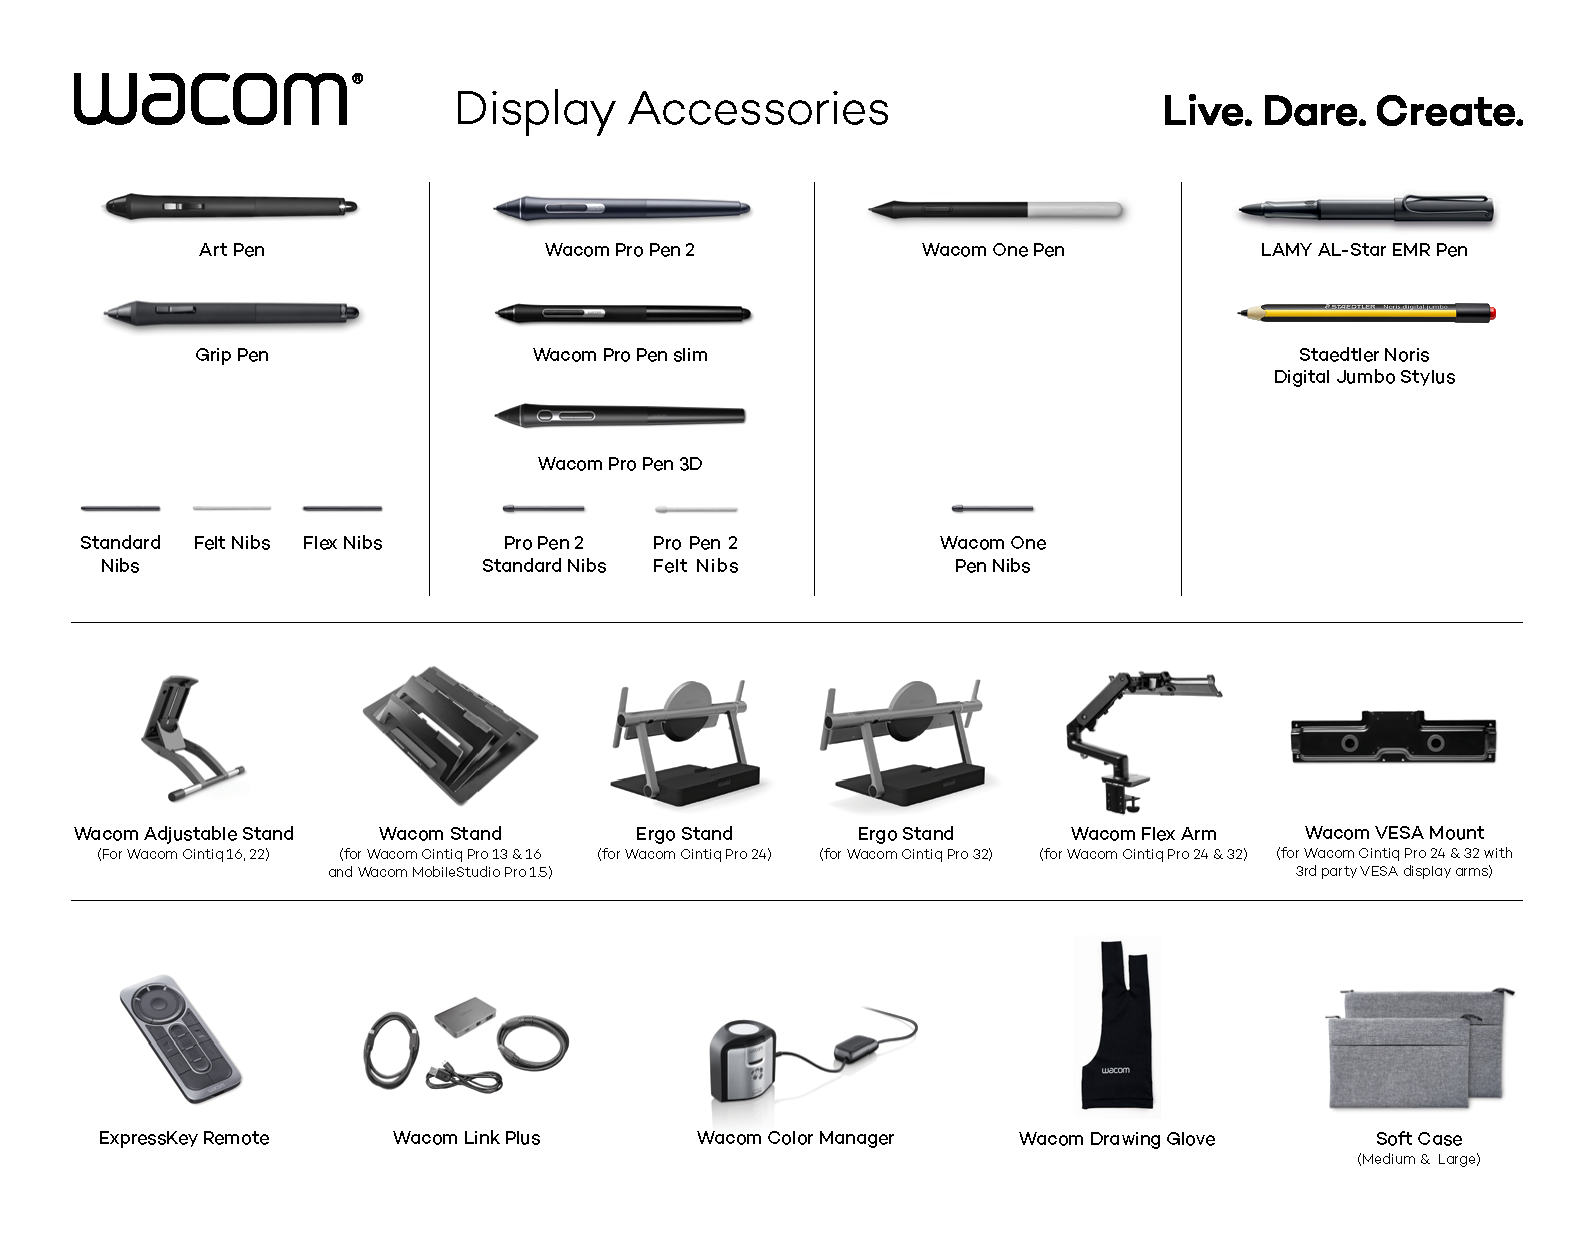 What Accessories can be used with current Wacom Display – Wacom